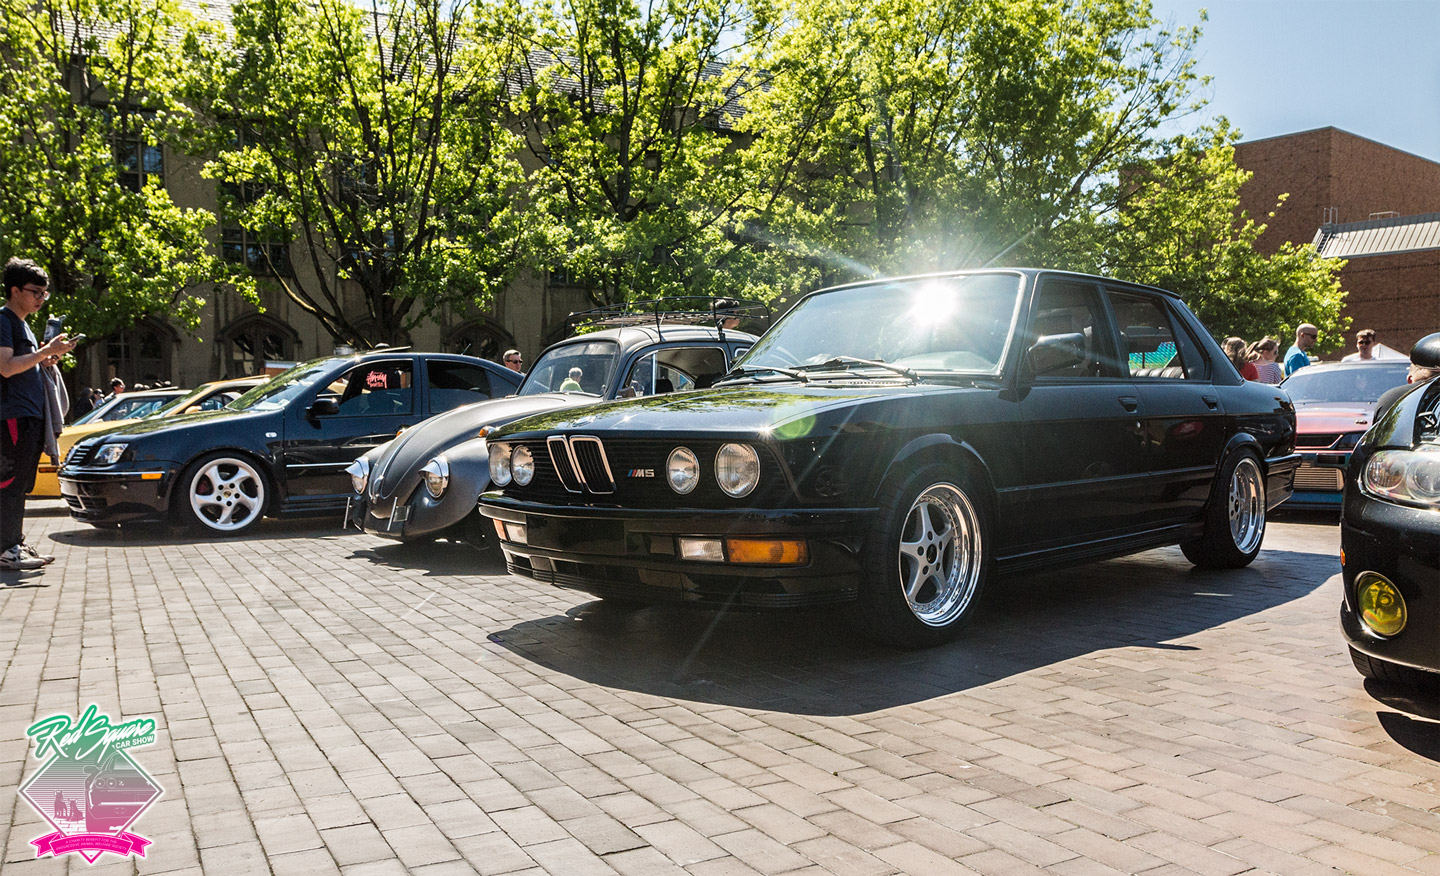 Red-Square-Car-Show-9-UW-Charity-Benefit-PAWS-org-White-Glove-Award-BMW-E28-M5-s